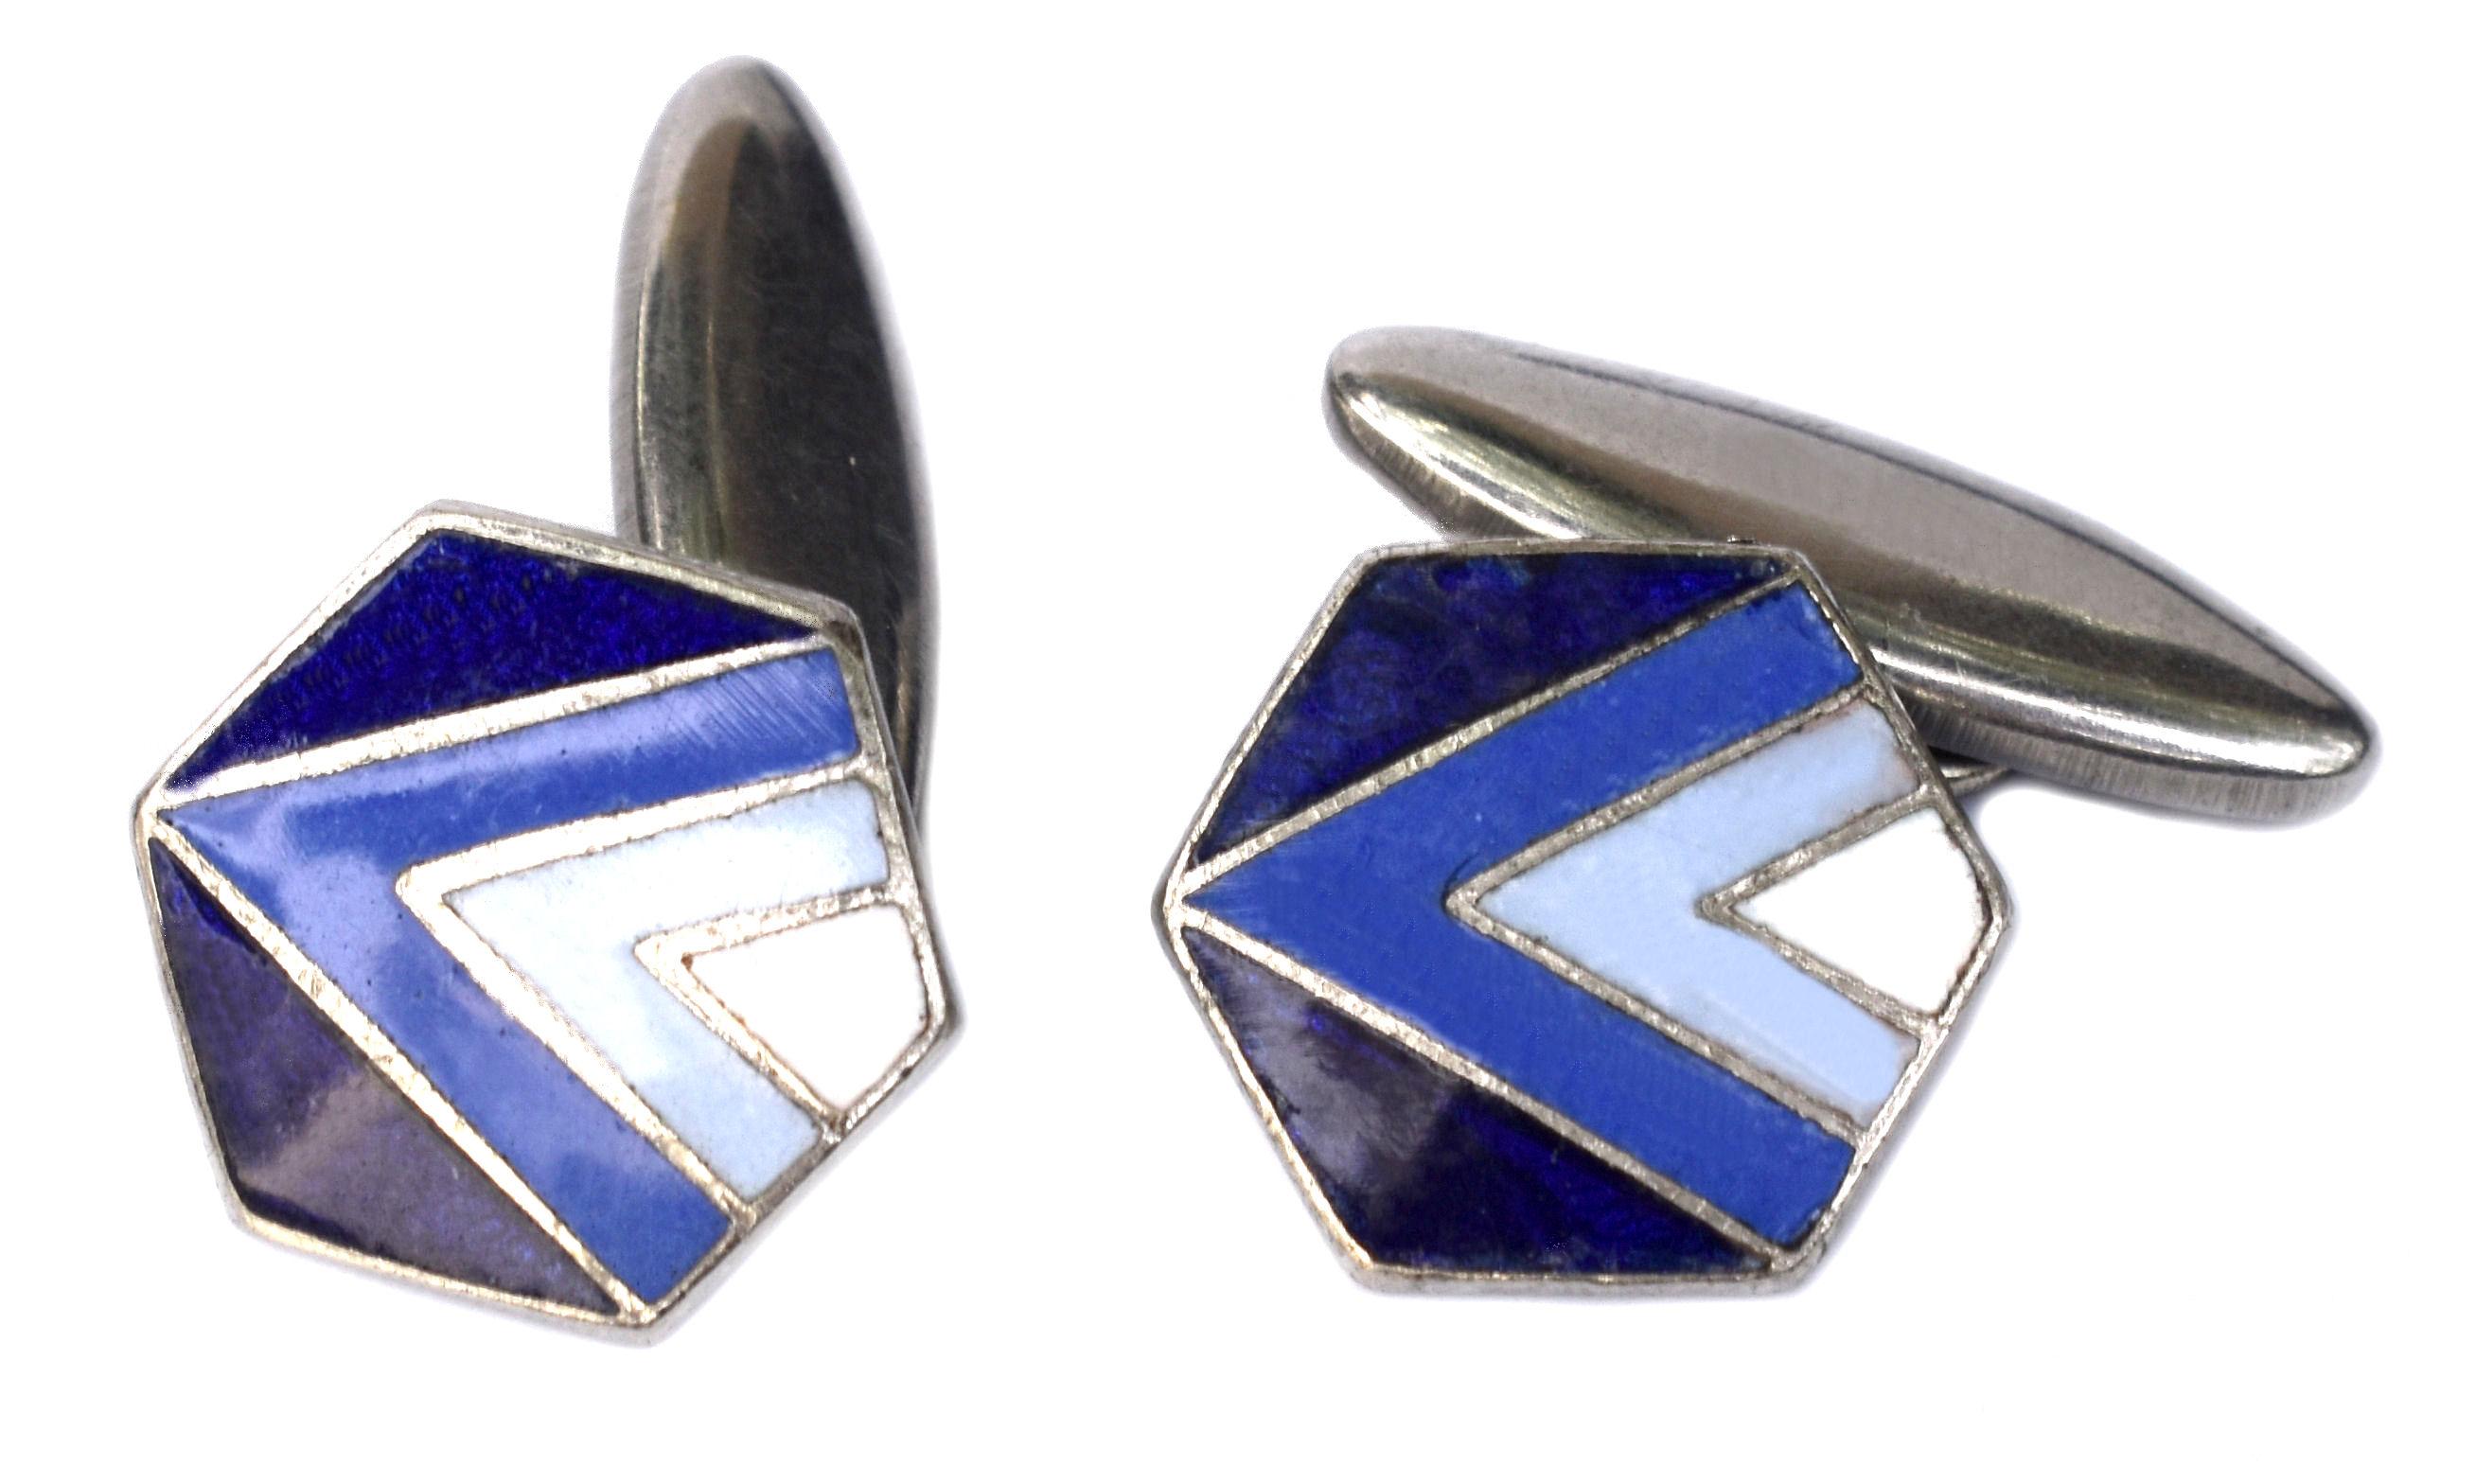 Extremely stylish and quite rare are these matching pair of English 1930's Art Deco modernist Enamel & Guilloch gentlemen's cufflinks. Fabulous geometric patterning and colour. Vivid blues in three shades and white enamelling make the perfect and